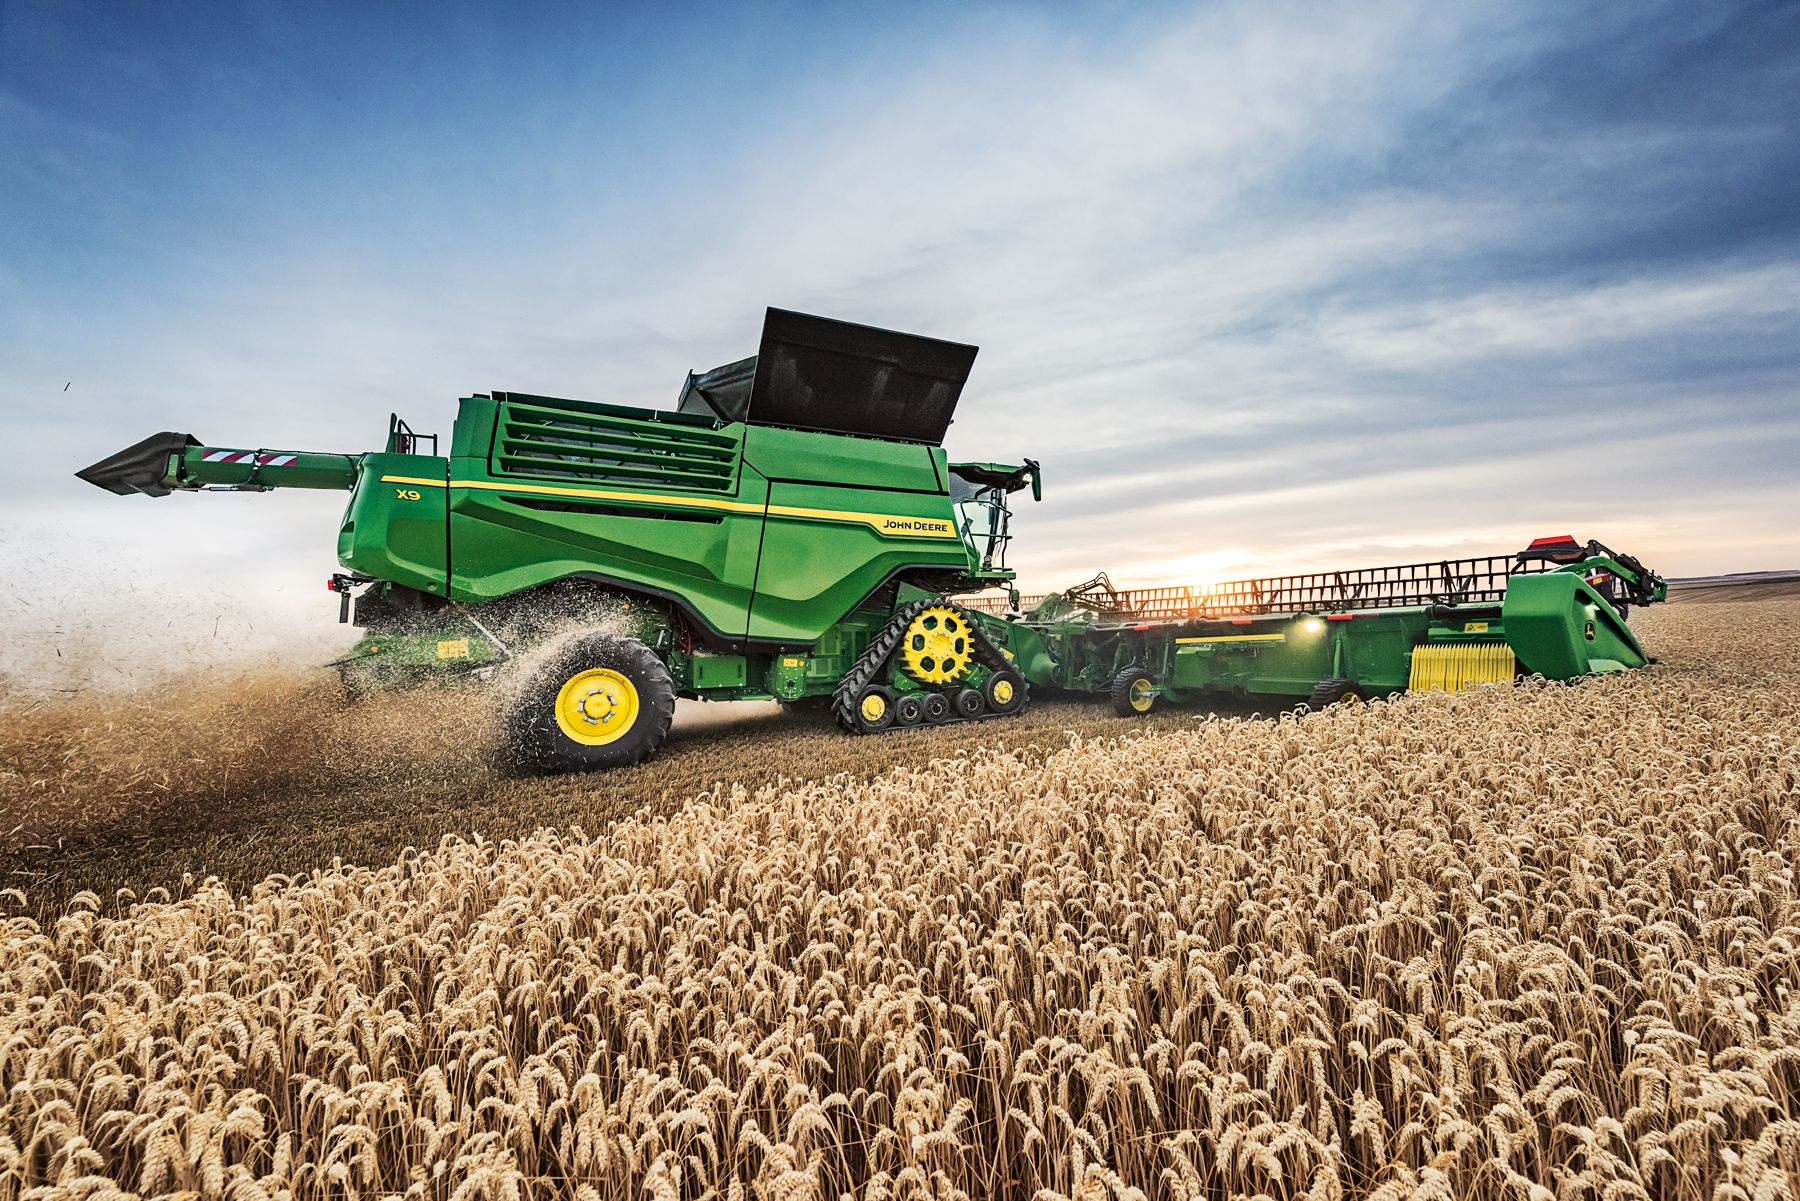 A new dimension in harvest productivity and efficiency